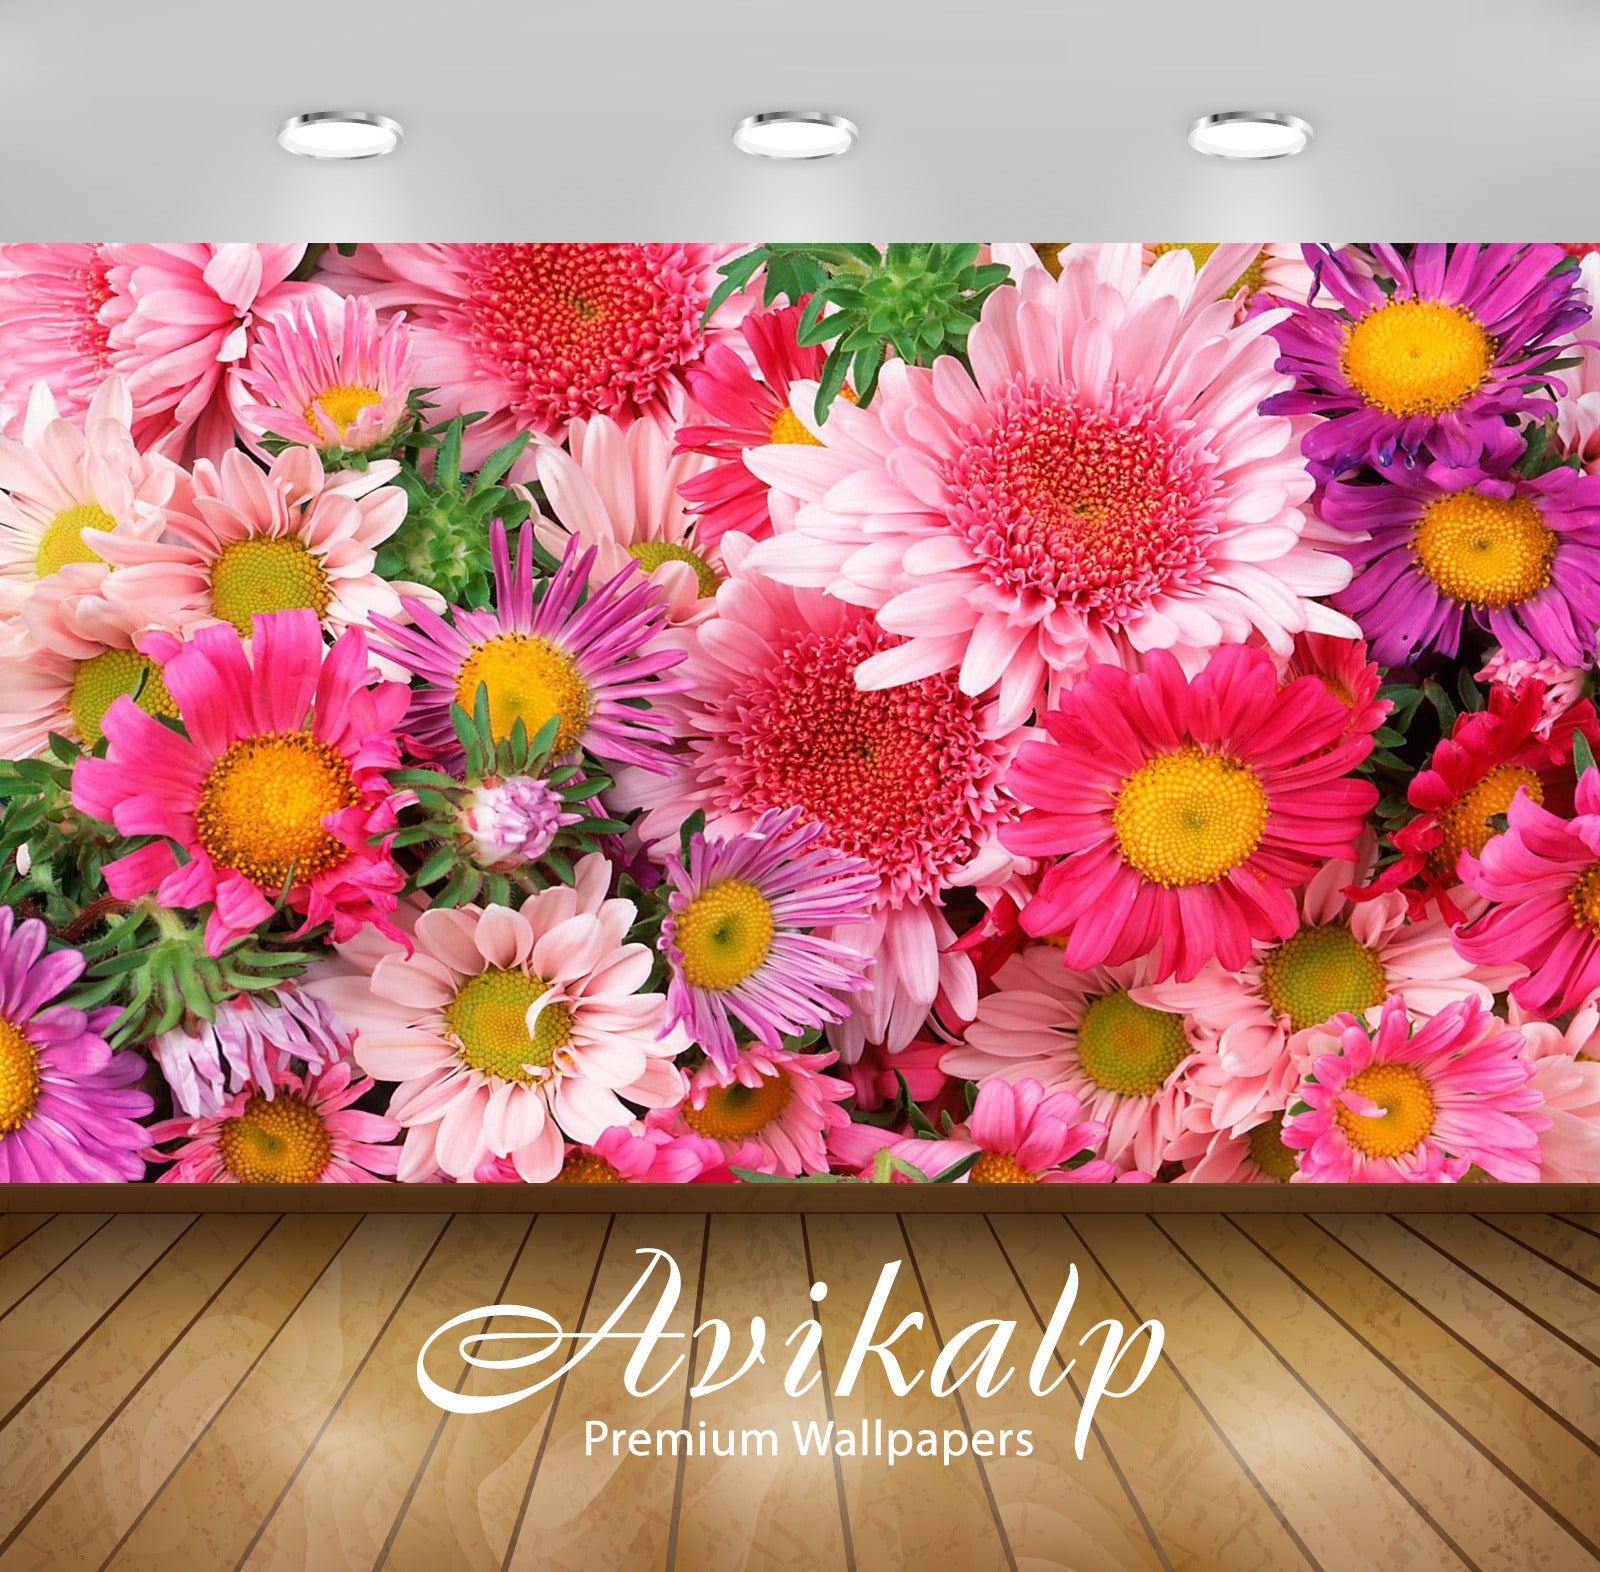 Avikalp Exclusive Awi1452 Beautiful Flowers Full HD Wallpapers for Living room, Hall, Kids Room, Kit